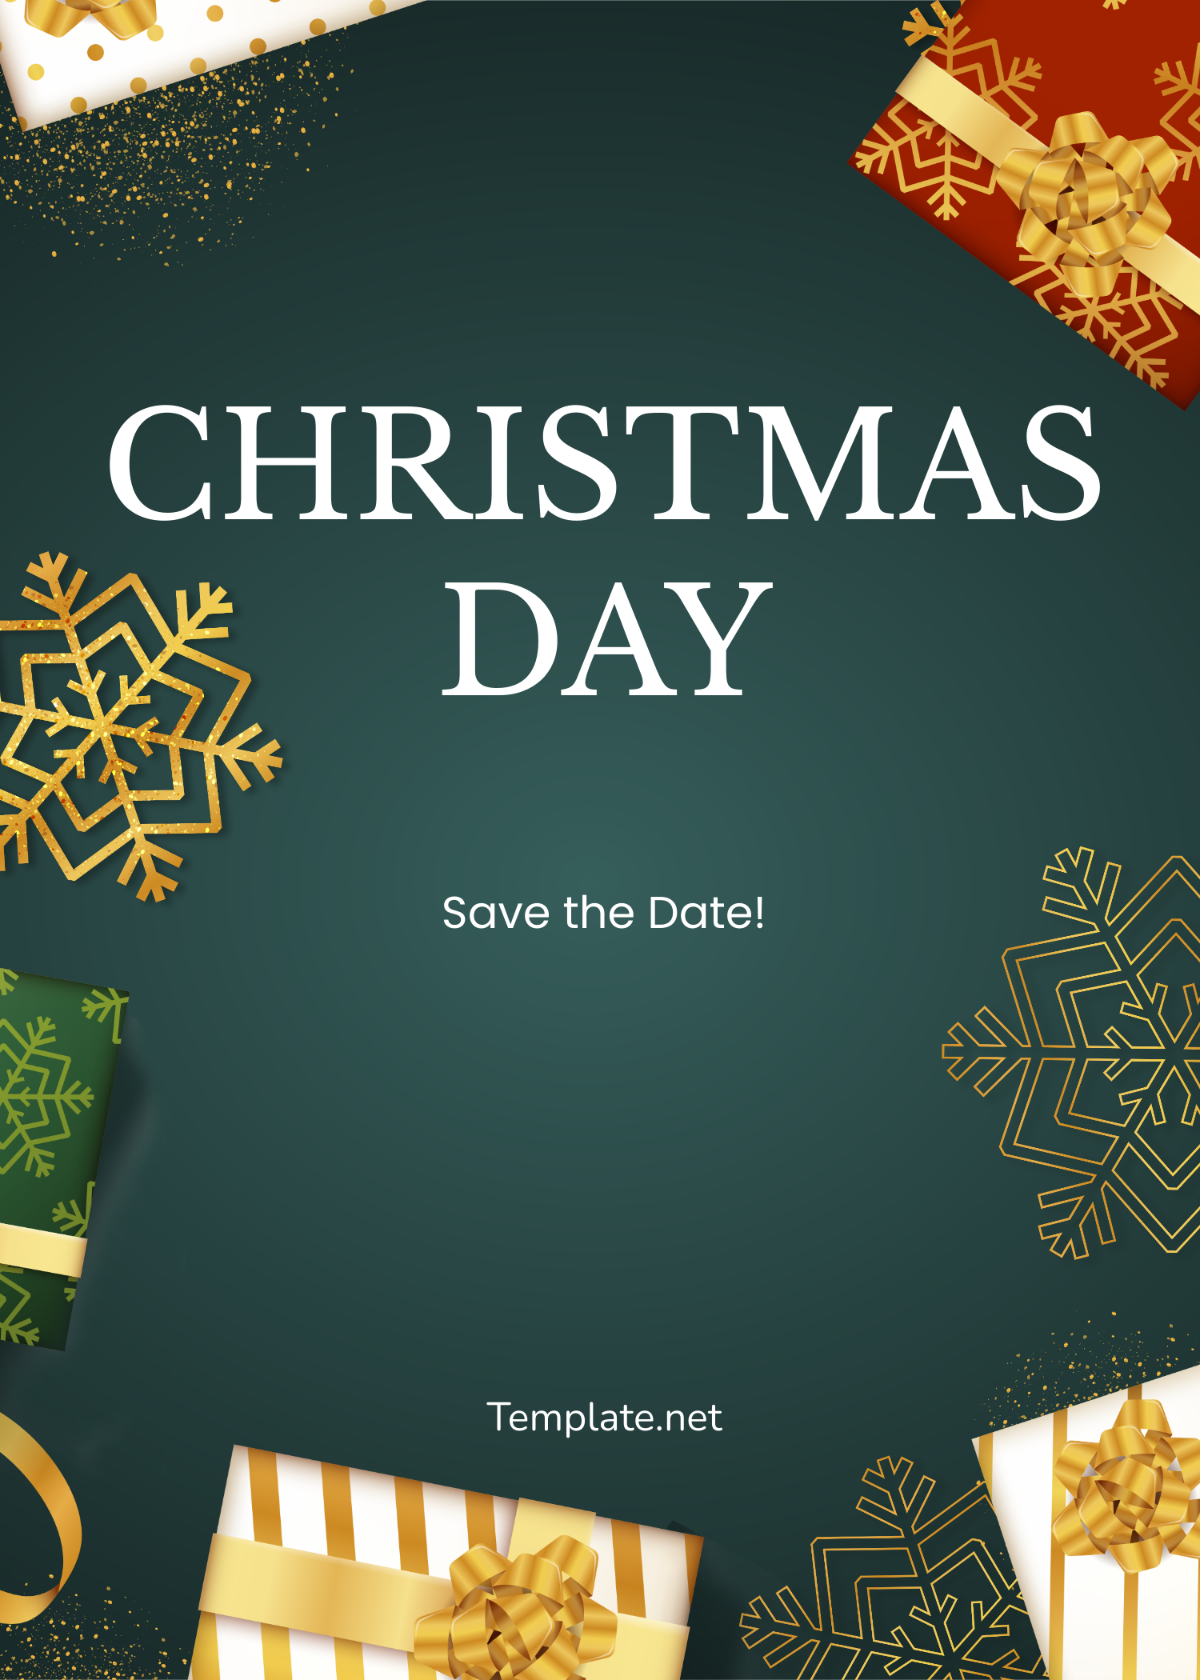 Save the Date Christmas Invitation